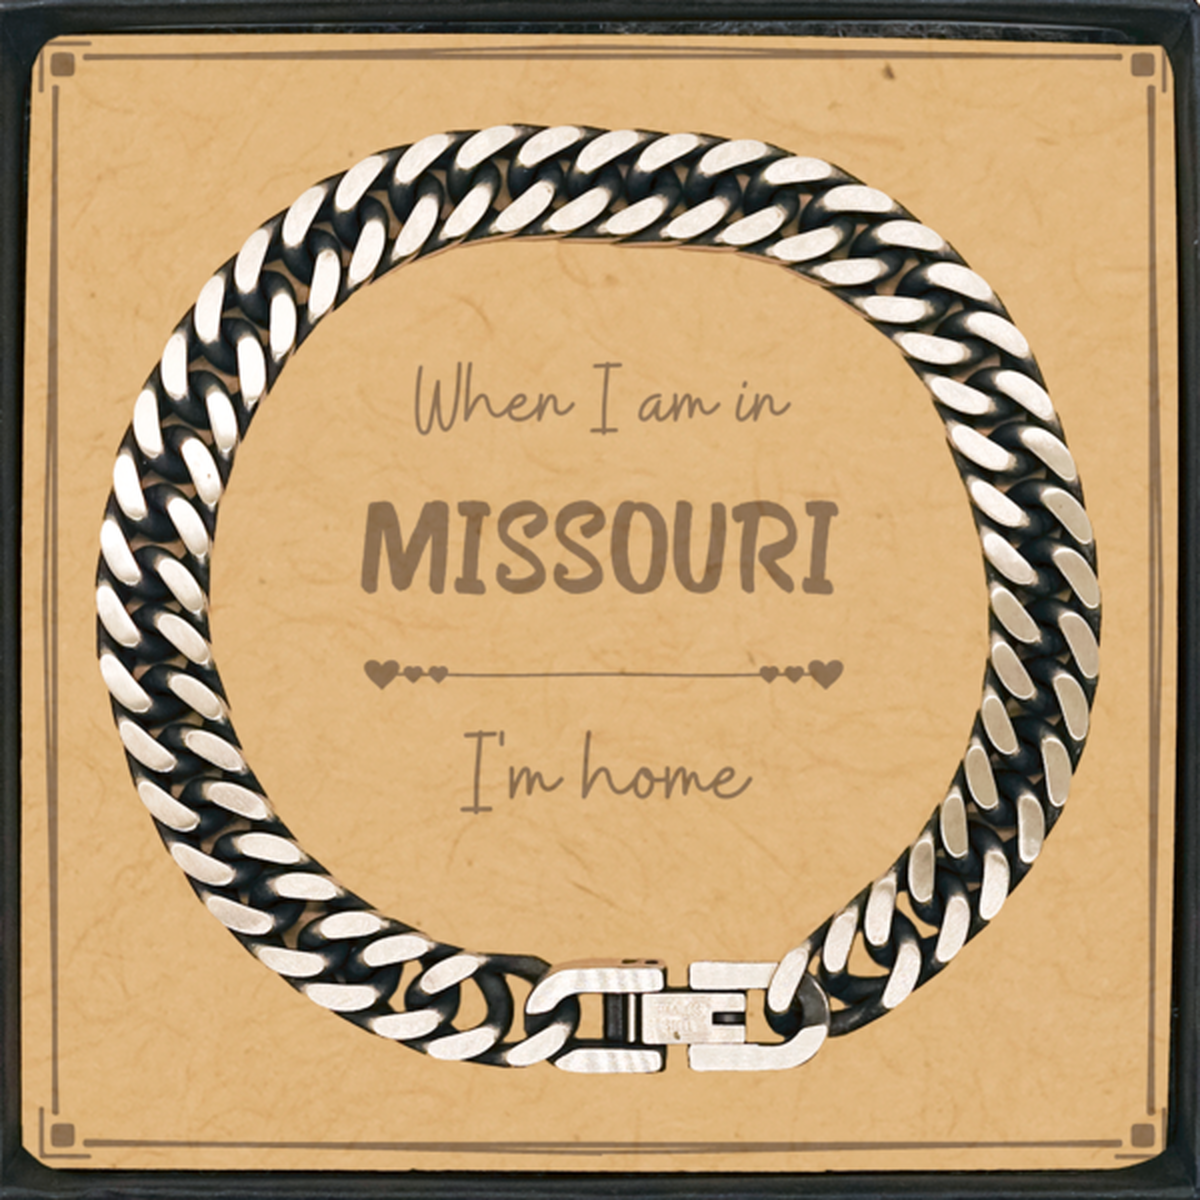 When I am in Missouri I'm home Cuban Link Chain Bracelet, Message Card Gifts For Missouri, State Missouri Birthday Gifts for Friends Coworker